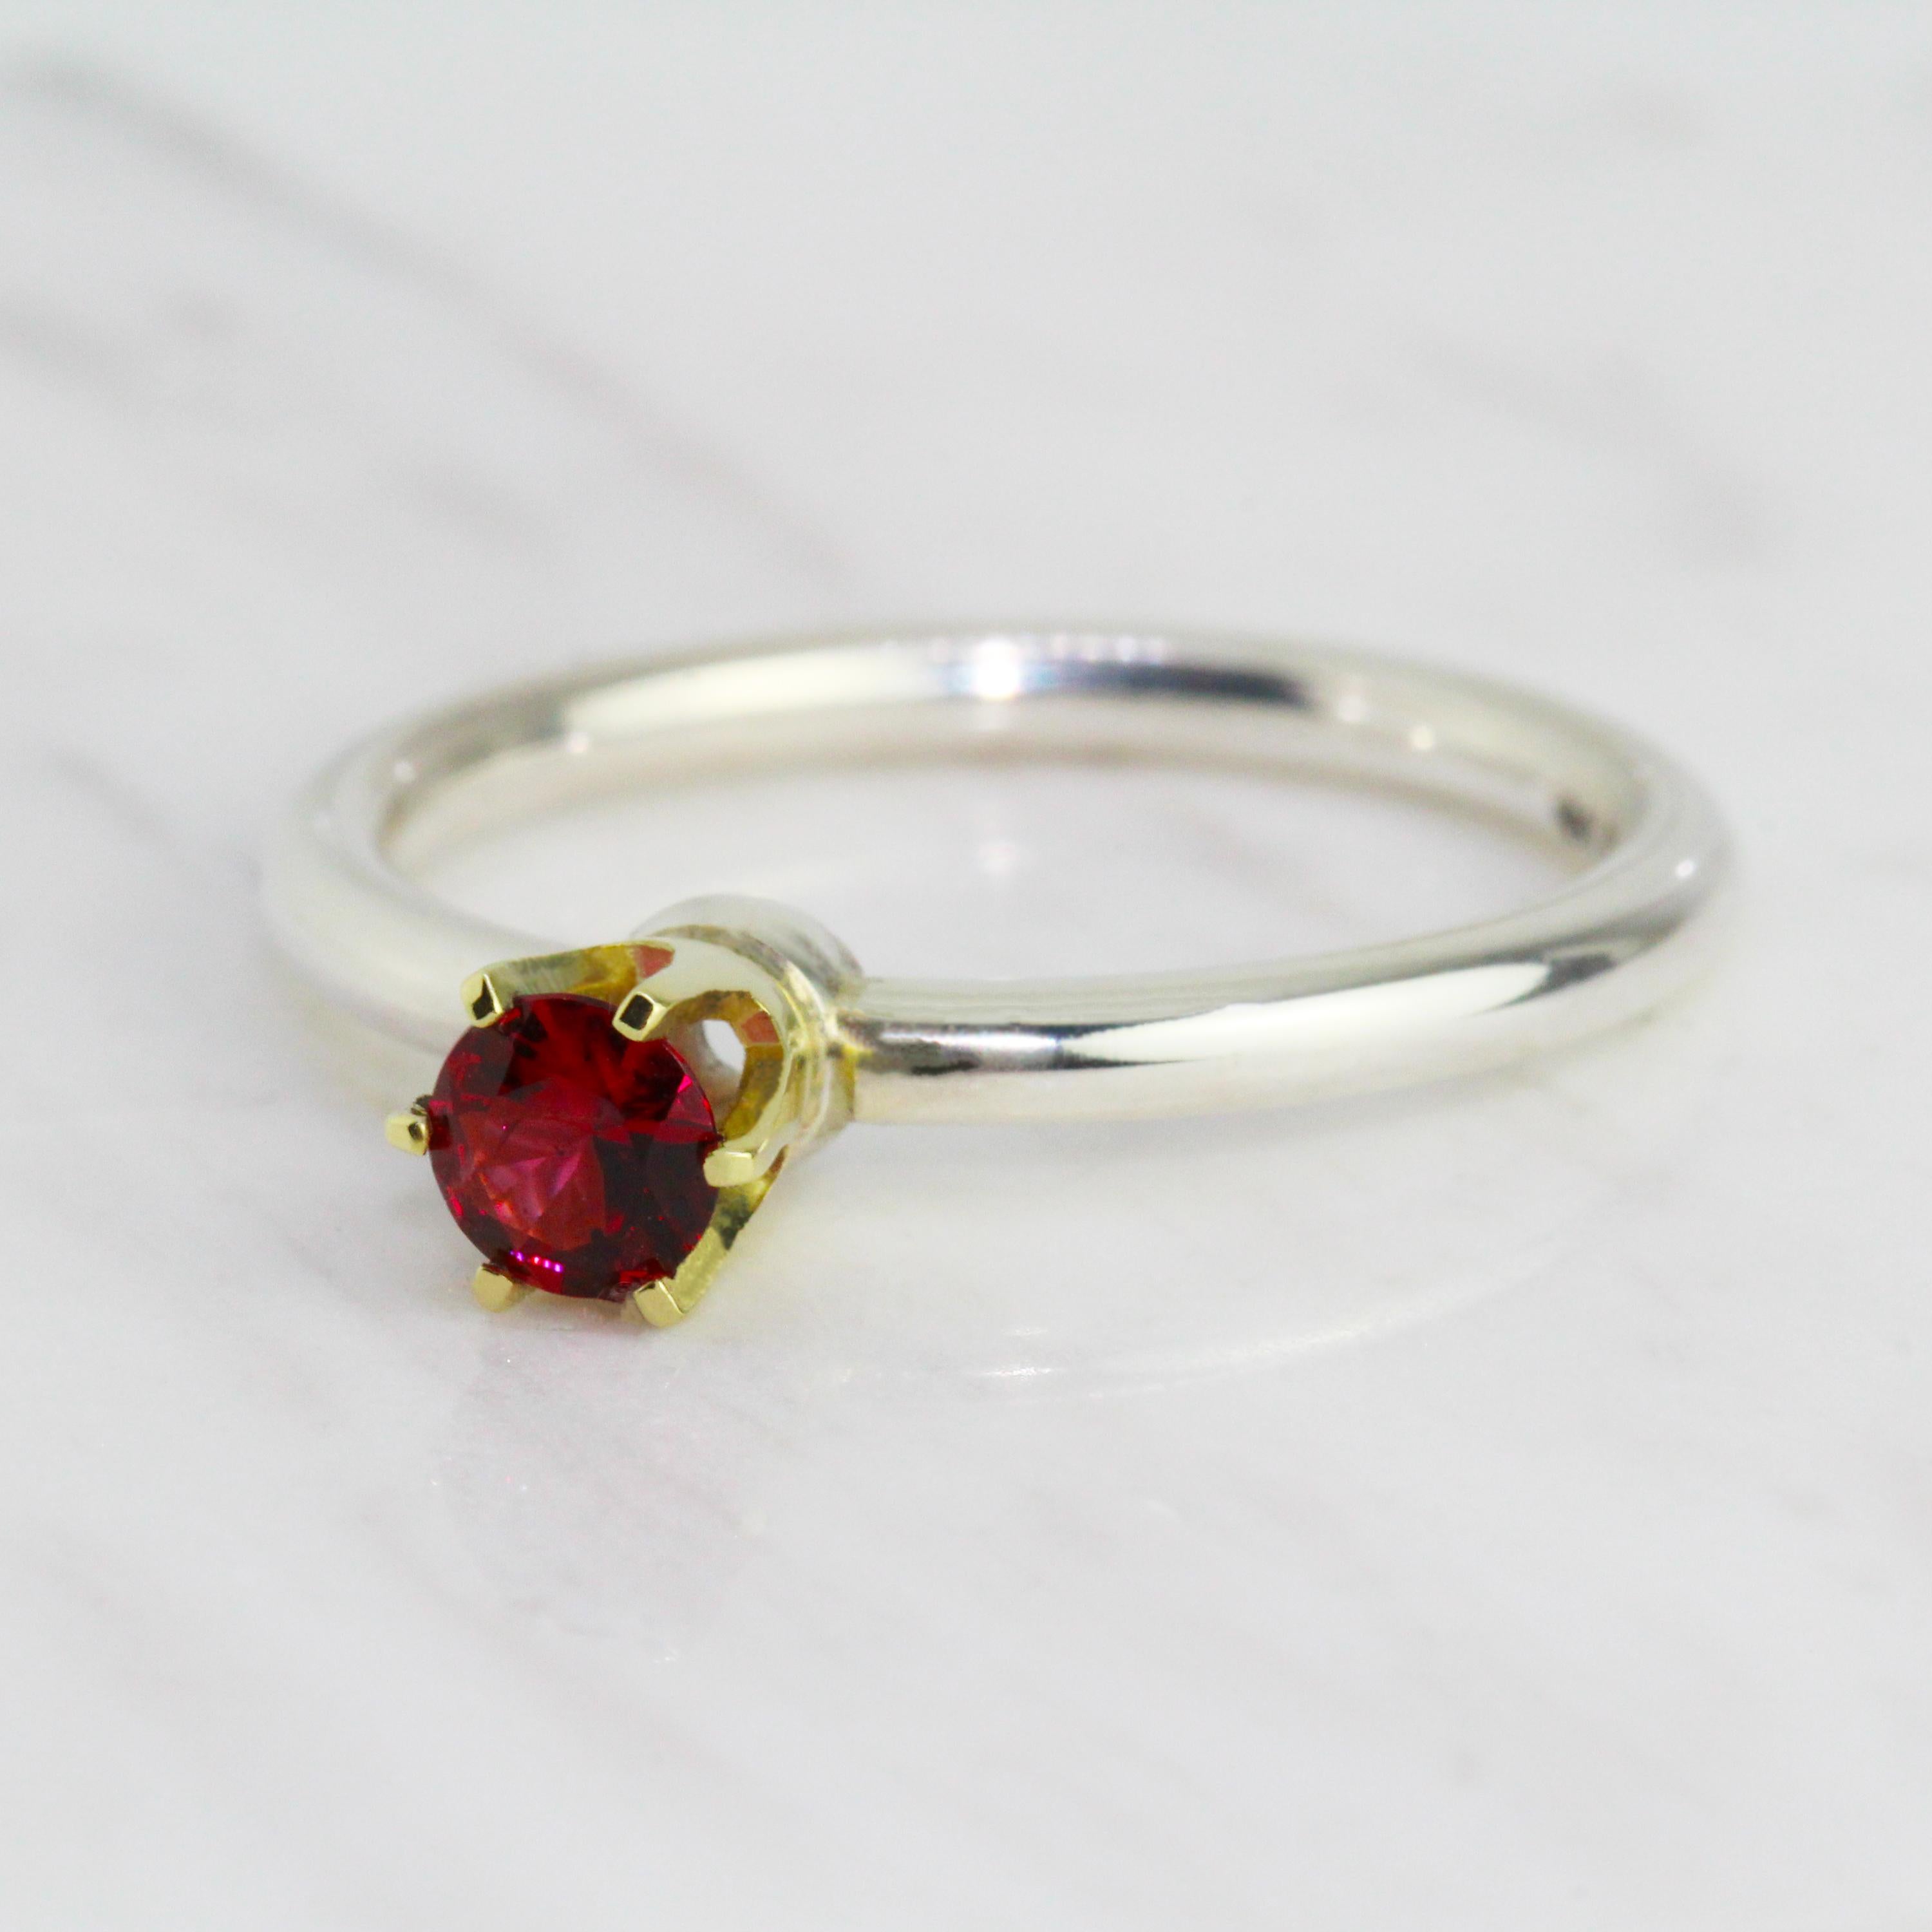 Sitting high and proud a vibrant red spinel. A vibrant red spinel takes centre stage in this unique Friederike Grace design. The delicious red spinel is held in an elegant 14k yellow gold six-prong setting on top of a comfortable round profile ring